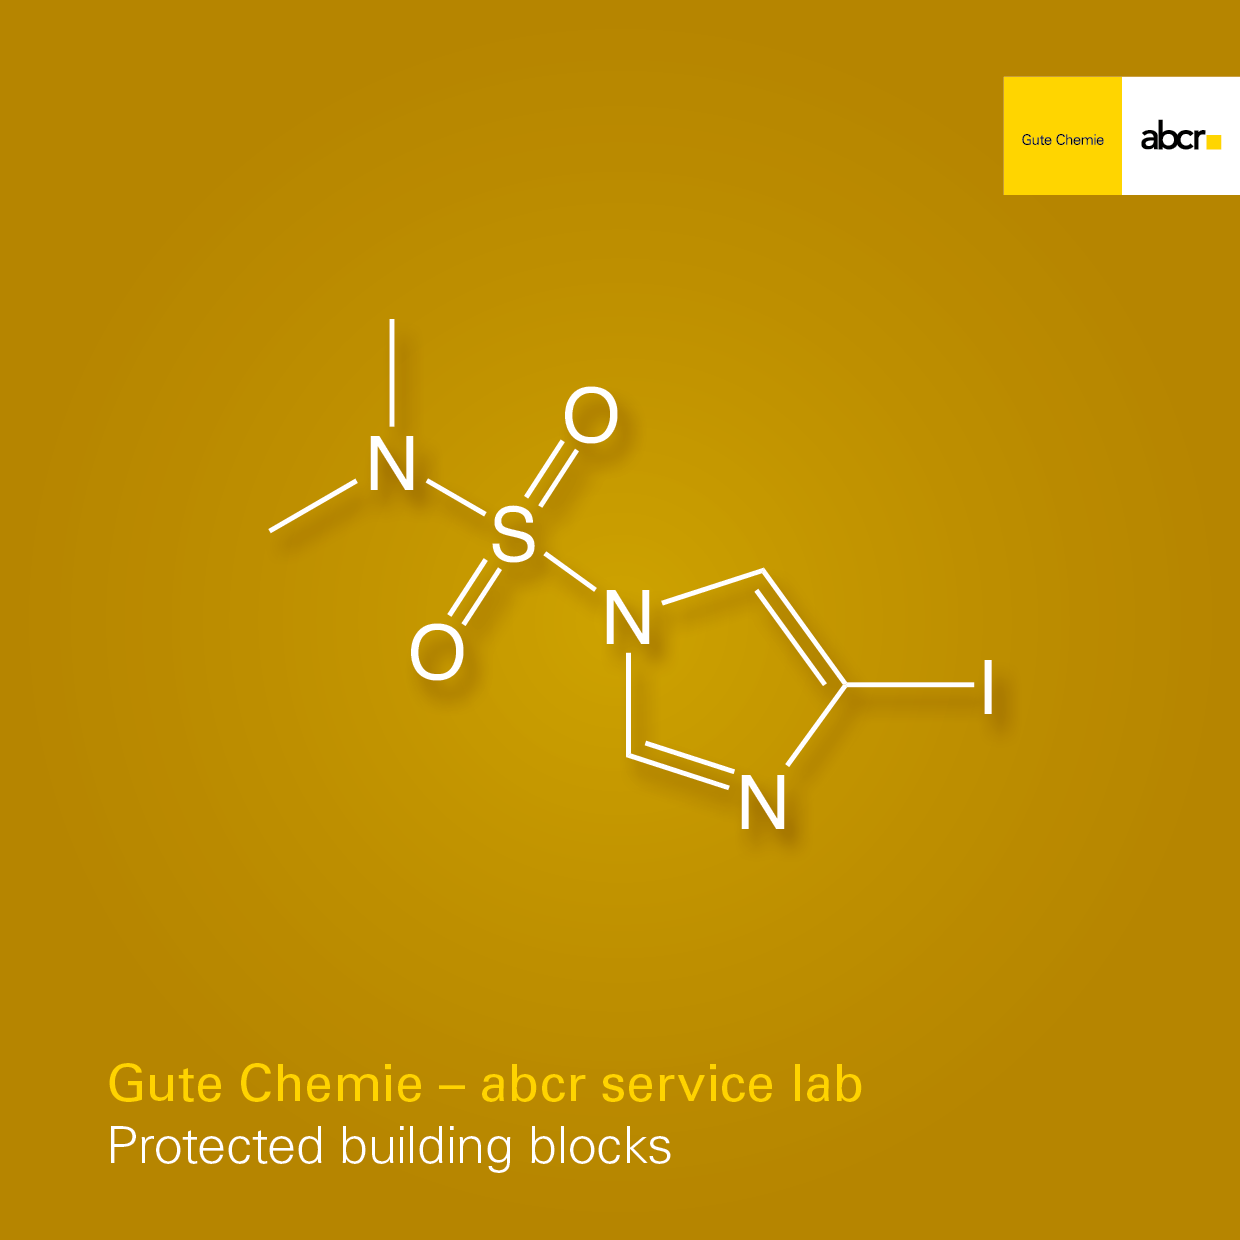 Protected building blocks - abcr service lab